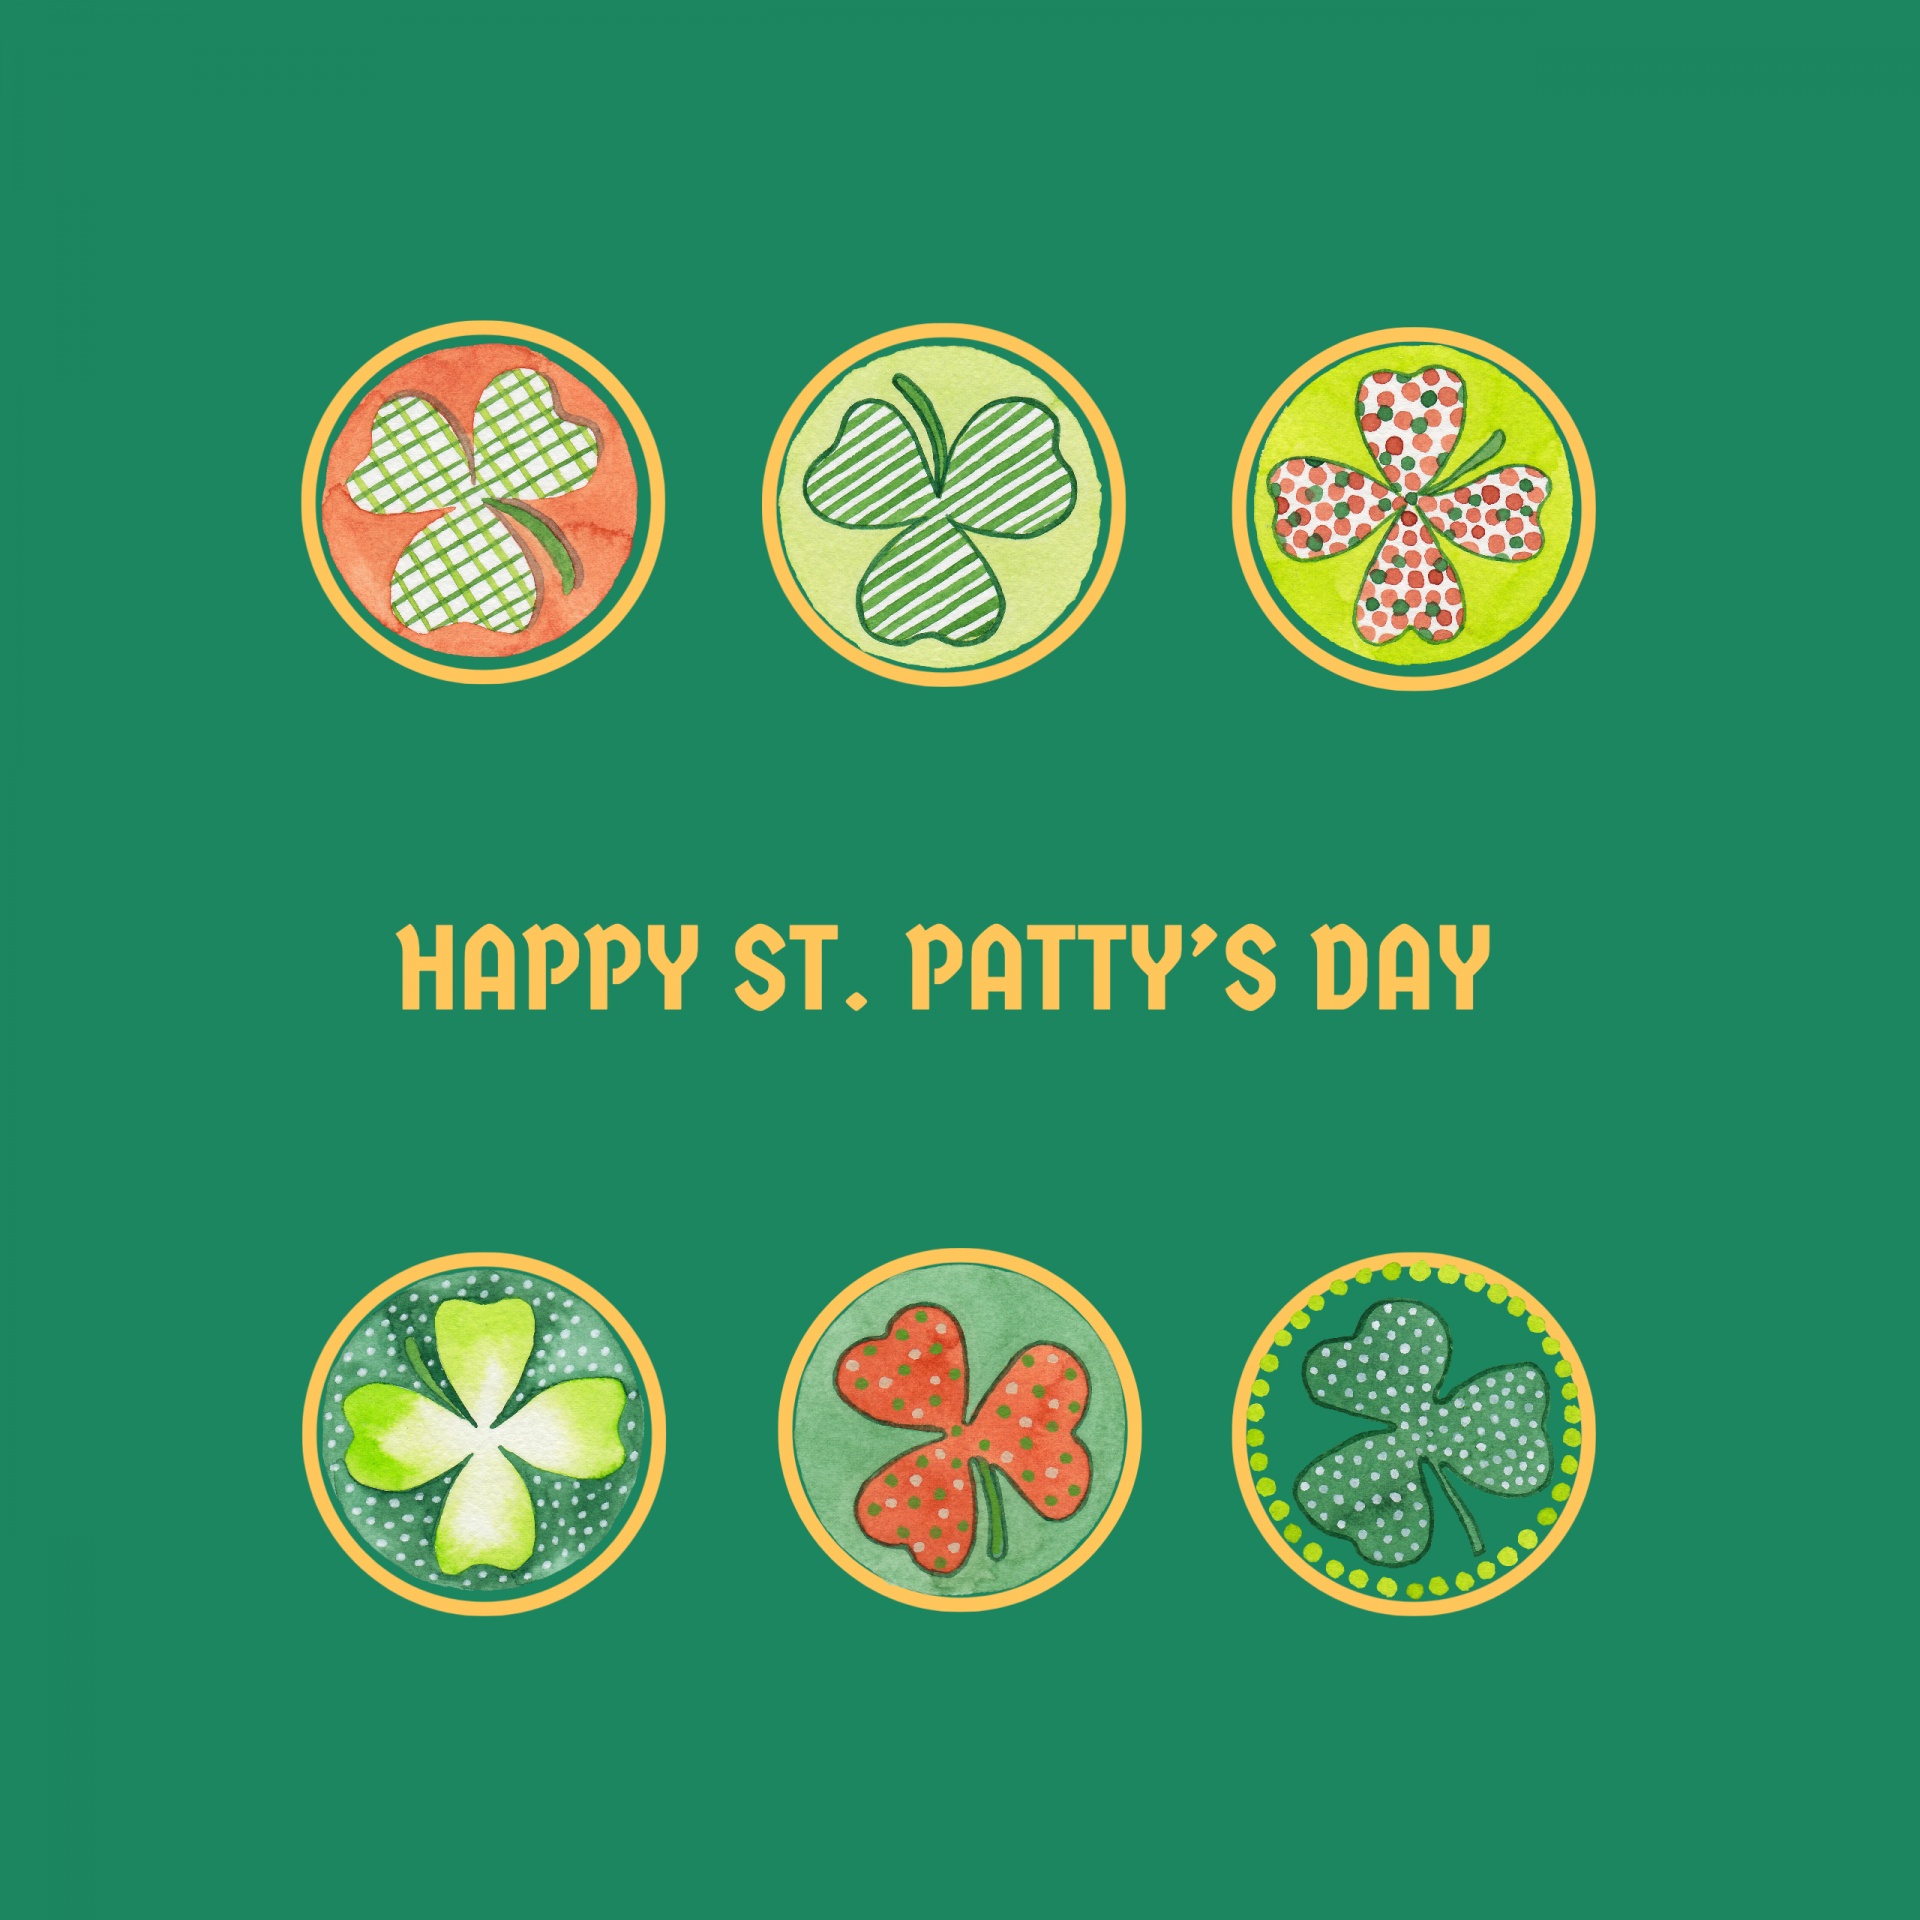 Card for St. Paddy's Day